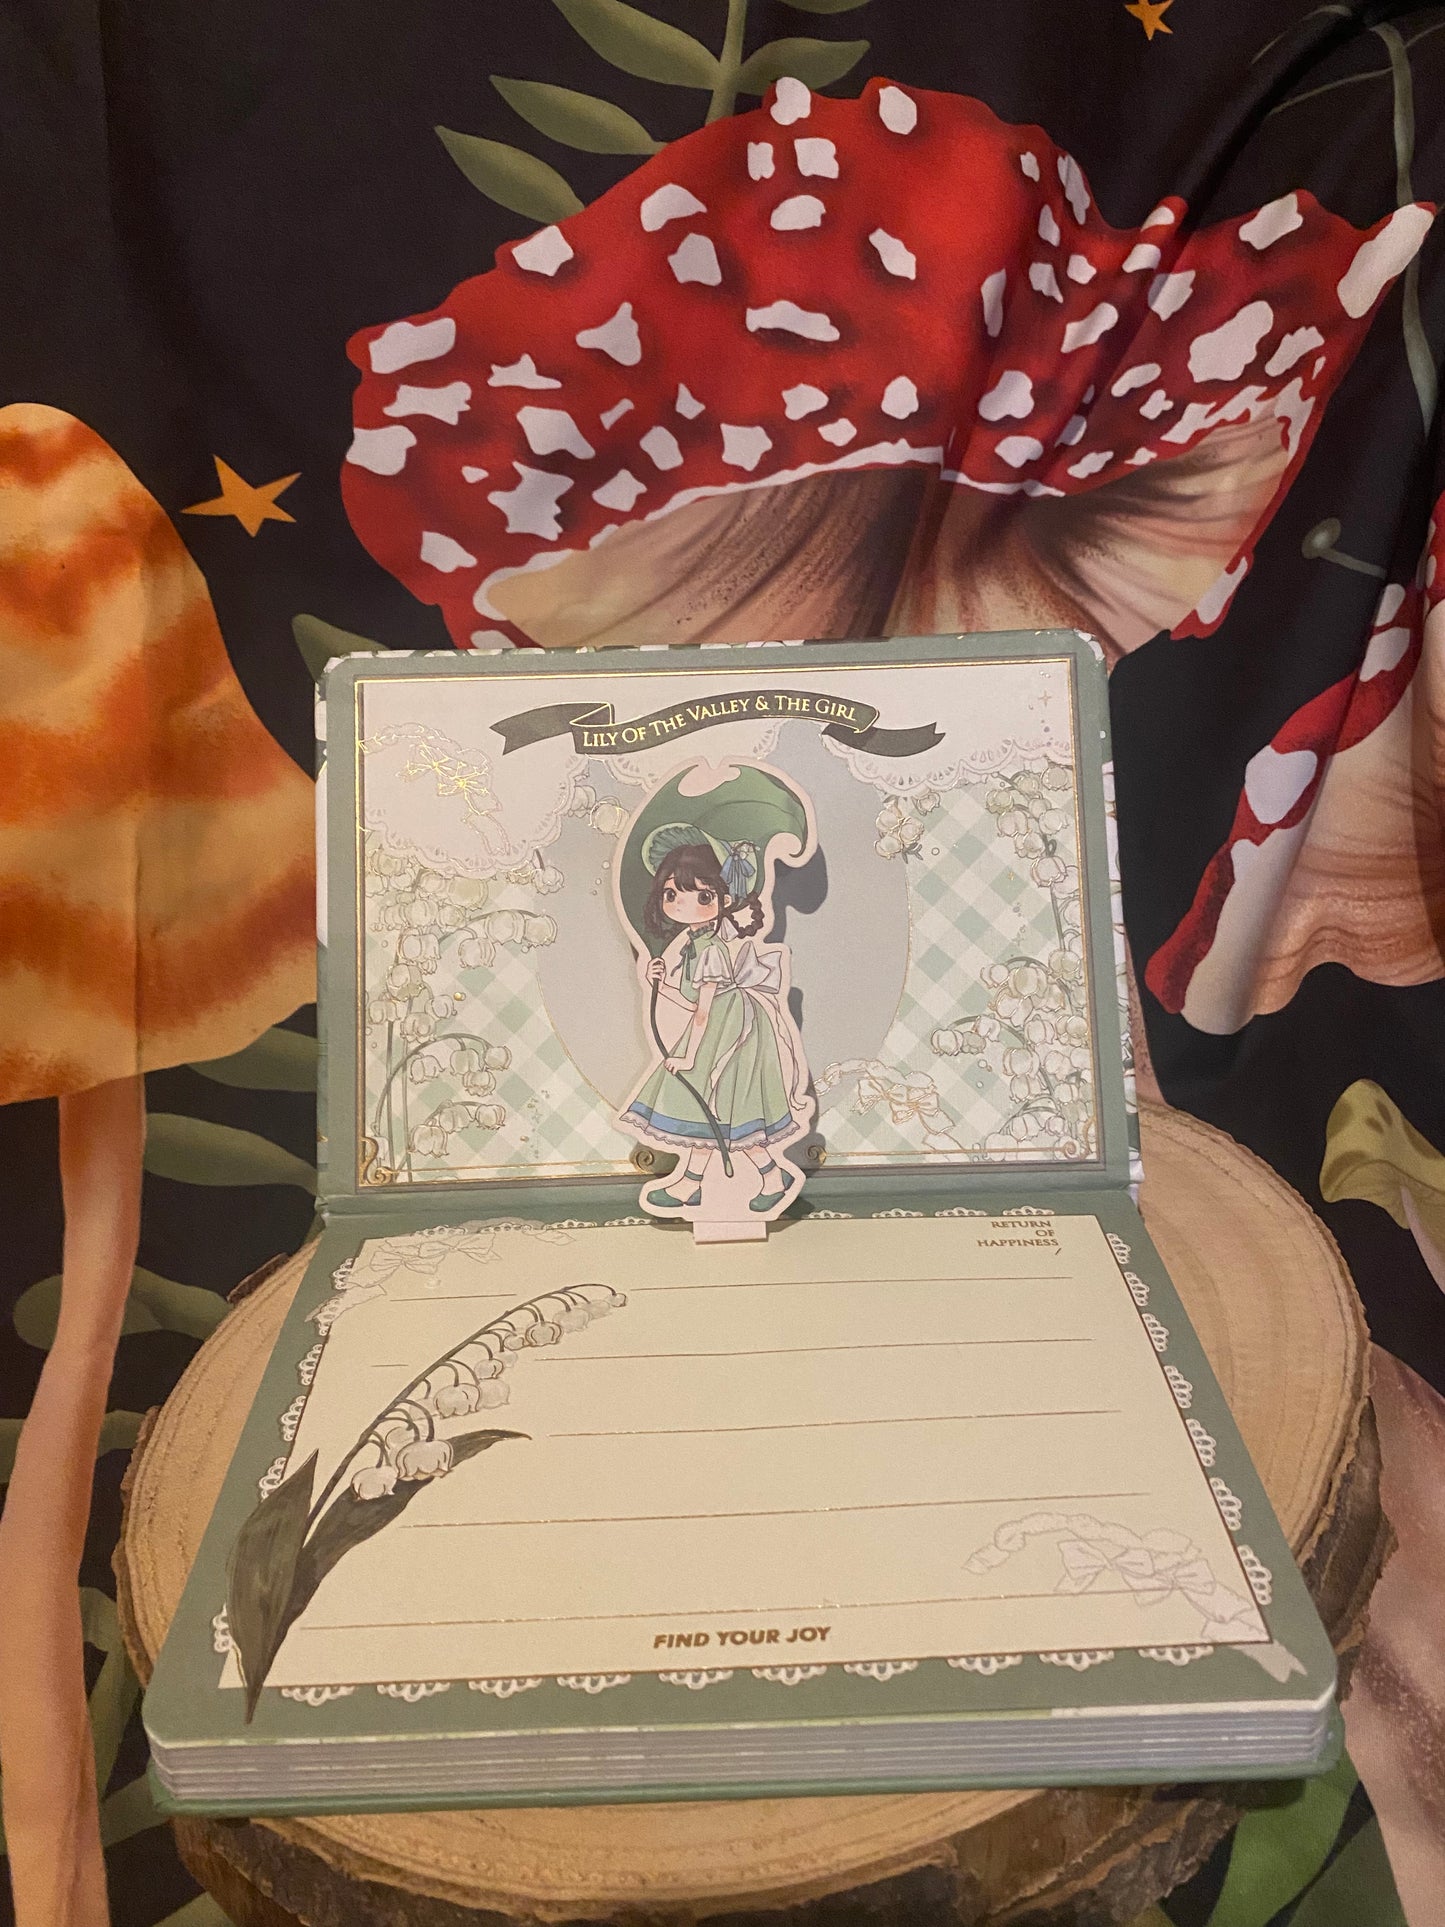 Anime Style “Lily of the Valley & The Girl” Journal